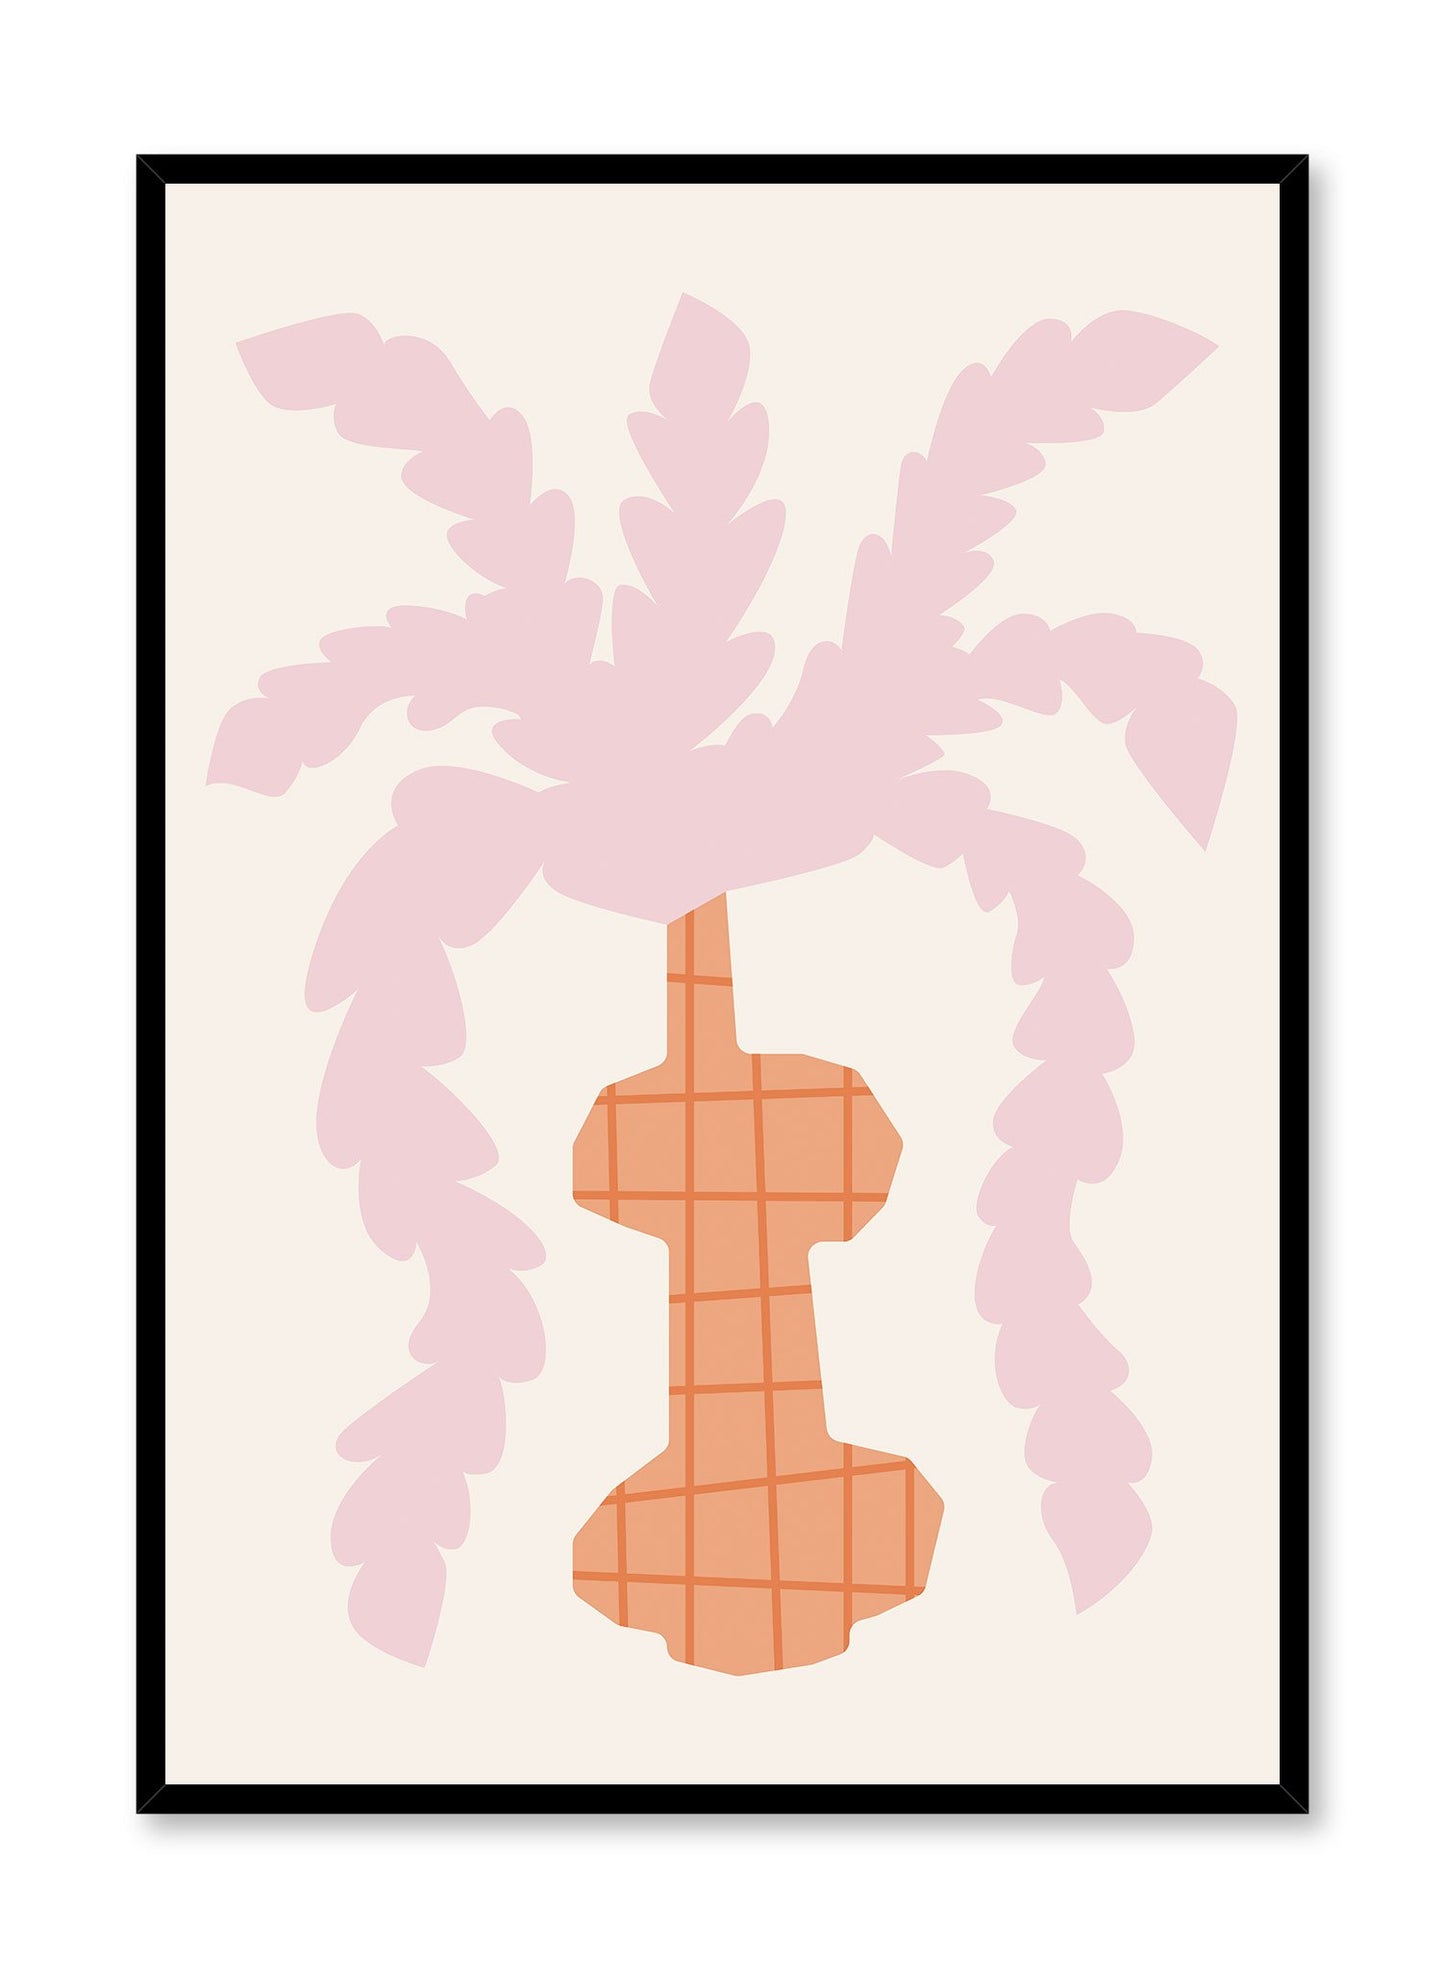 Party Vase is a vector illustration of long pink fluffy flowers flowing out of a violin-shaped vase by Opposite Wall.